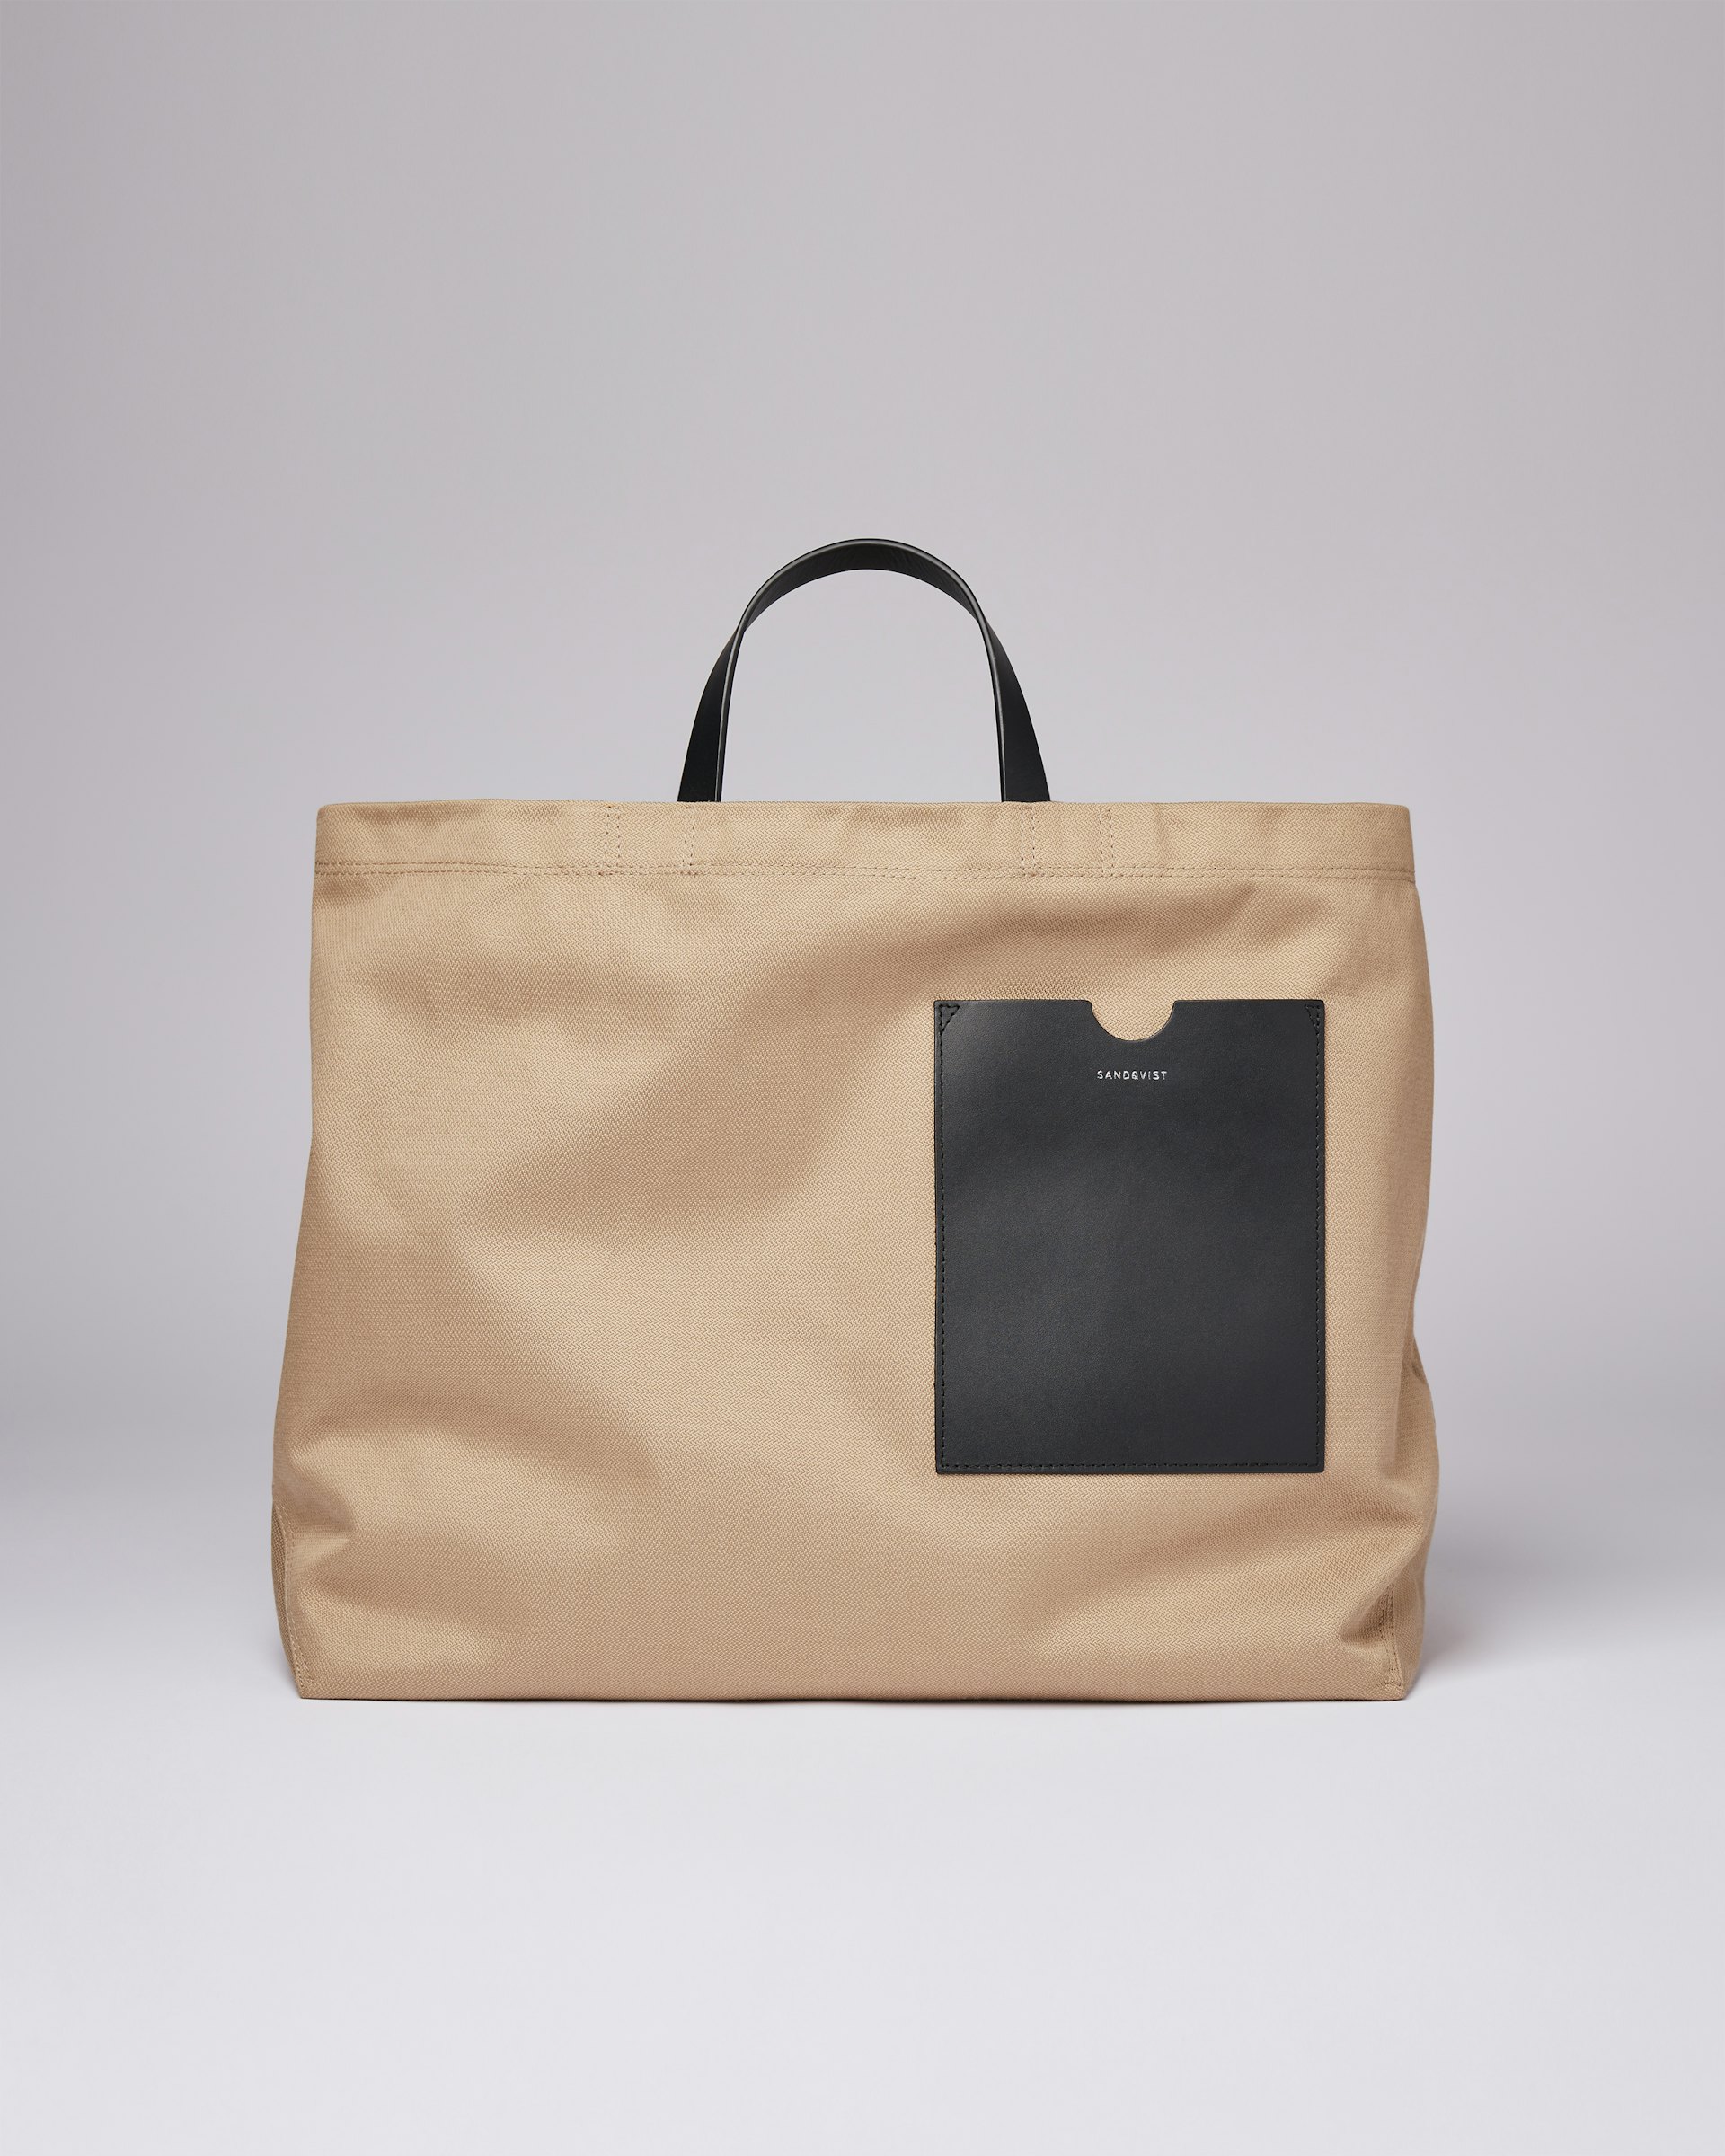 Agnes belongs to the category Tote bags and is in color black & beige (1 of 7)